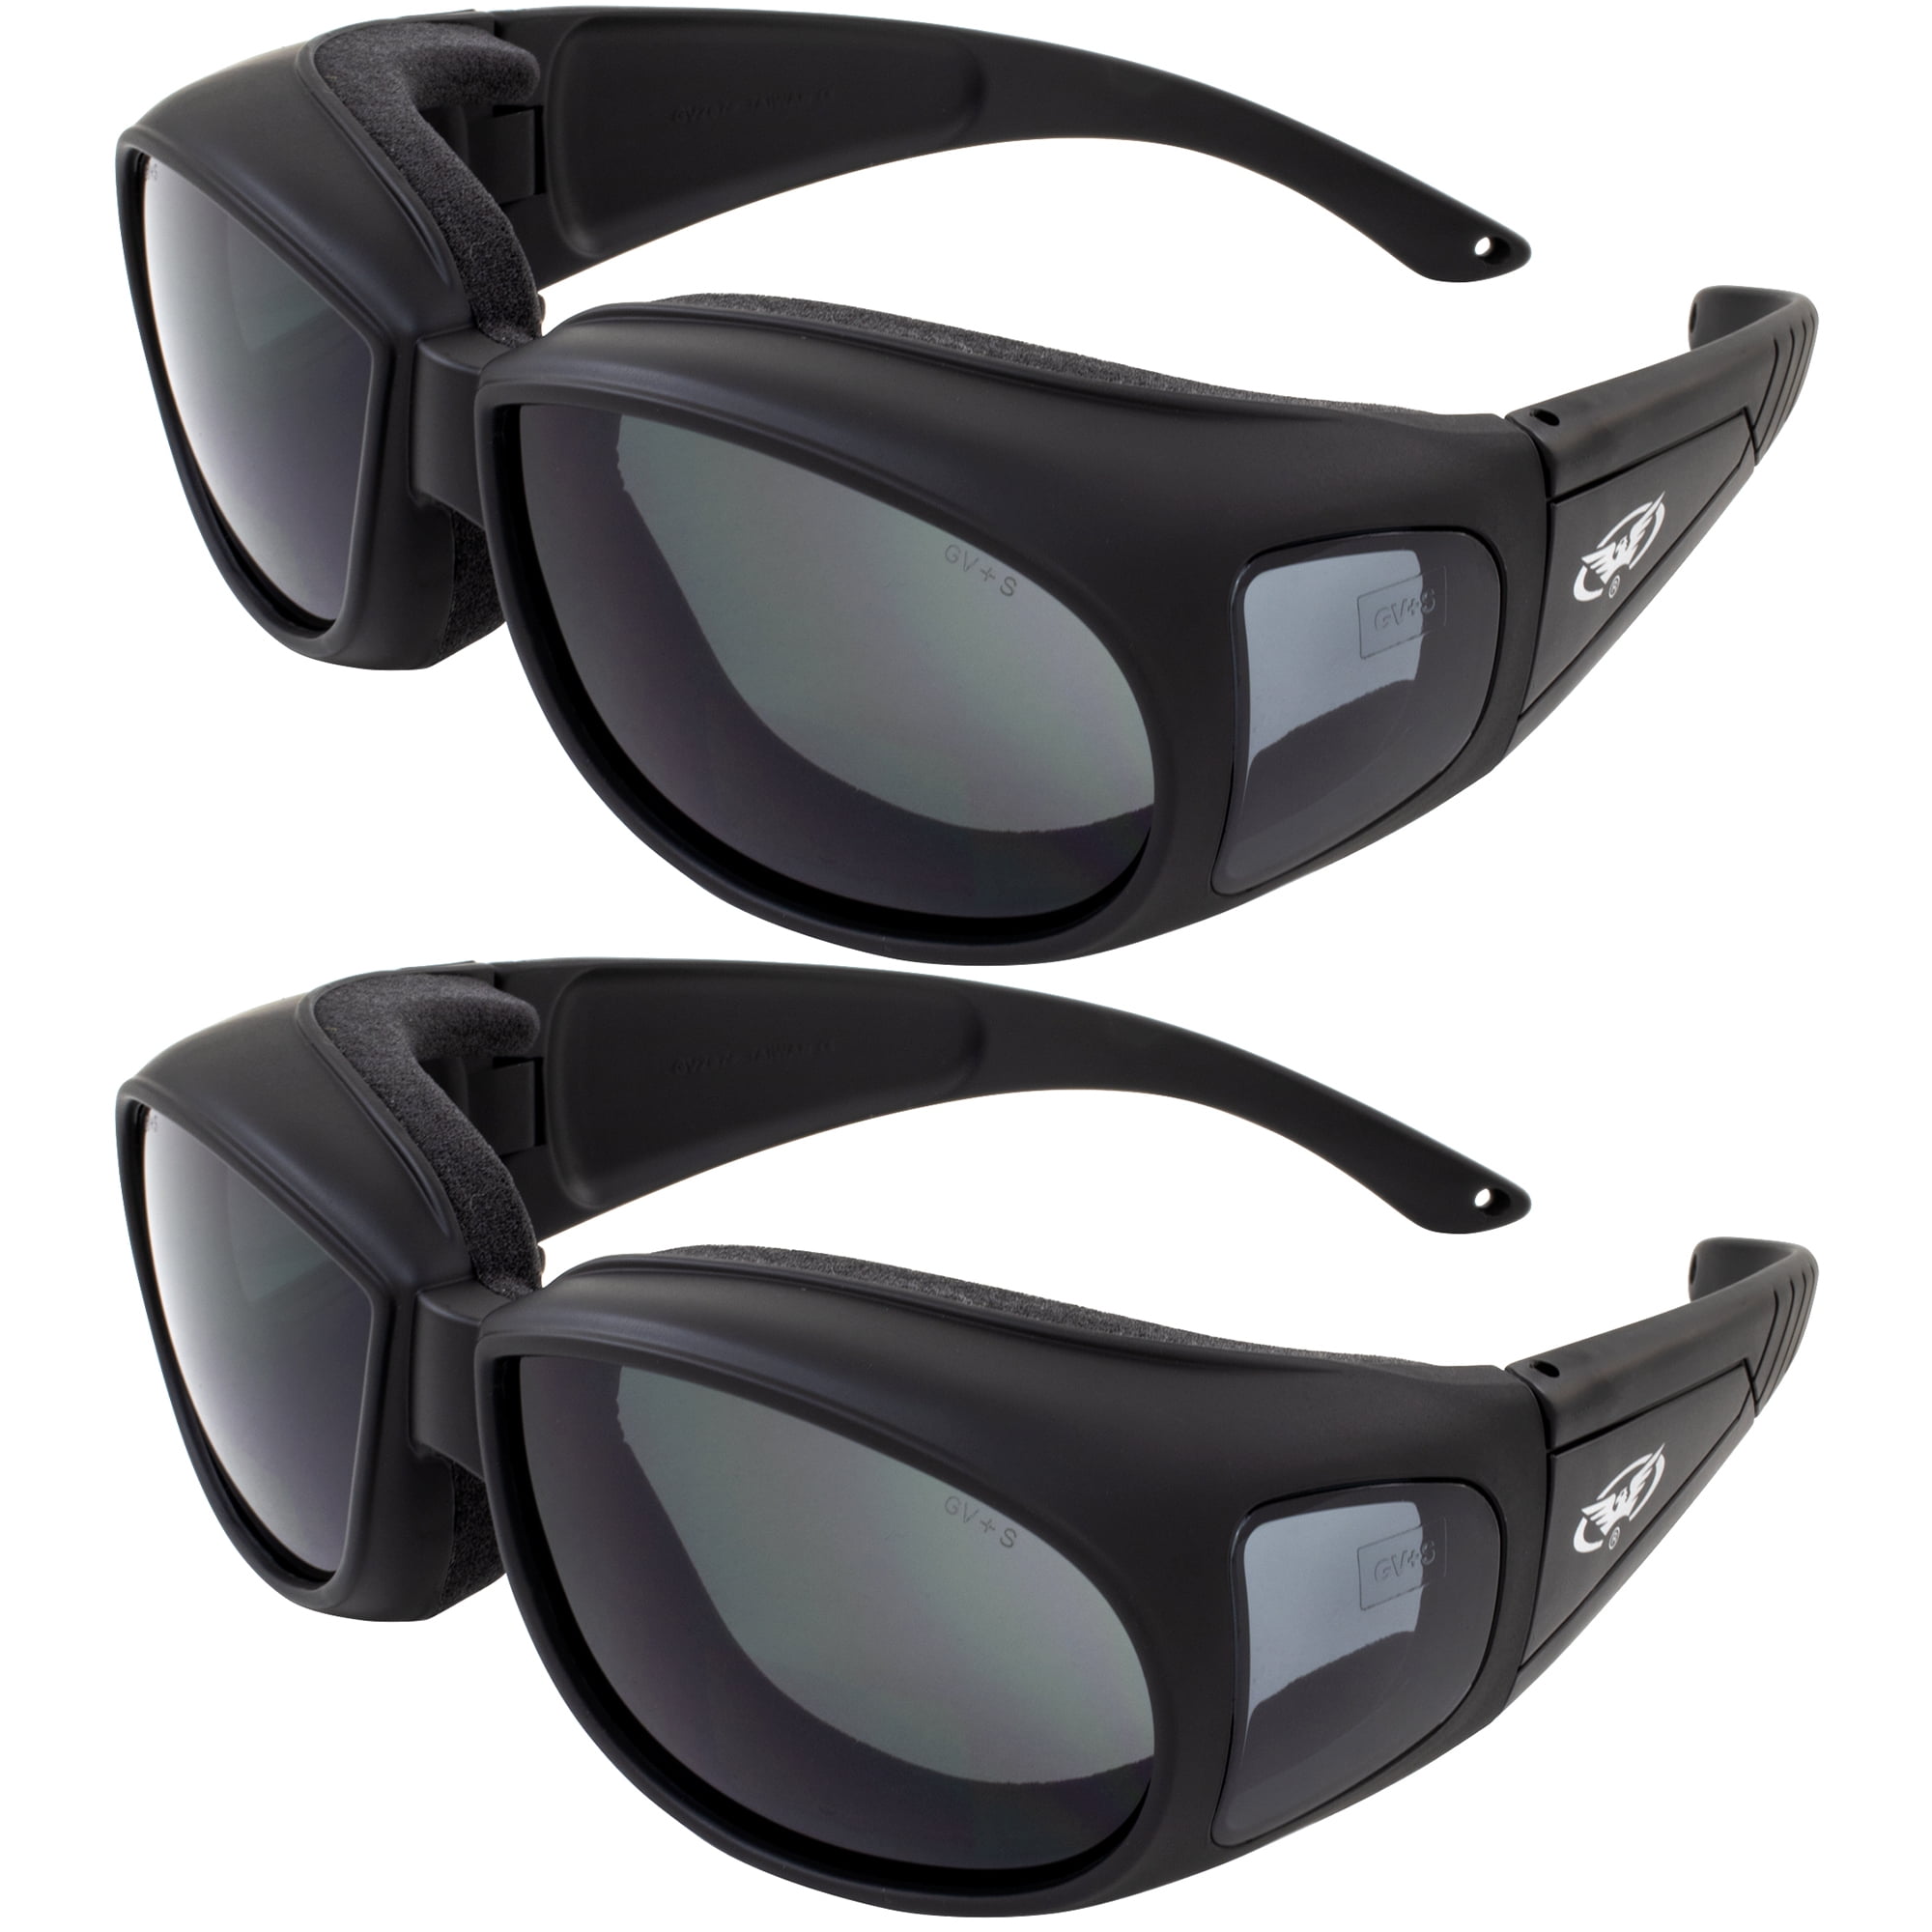 Z87 Fit Over Prescription RX Glasses Sunglasses Safety Motorcycle Shop NWT Cover